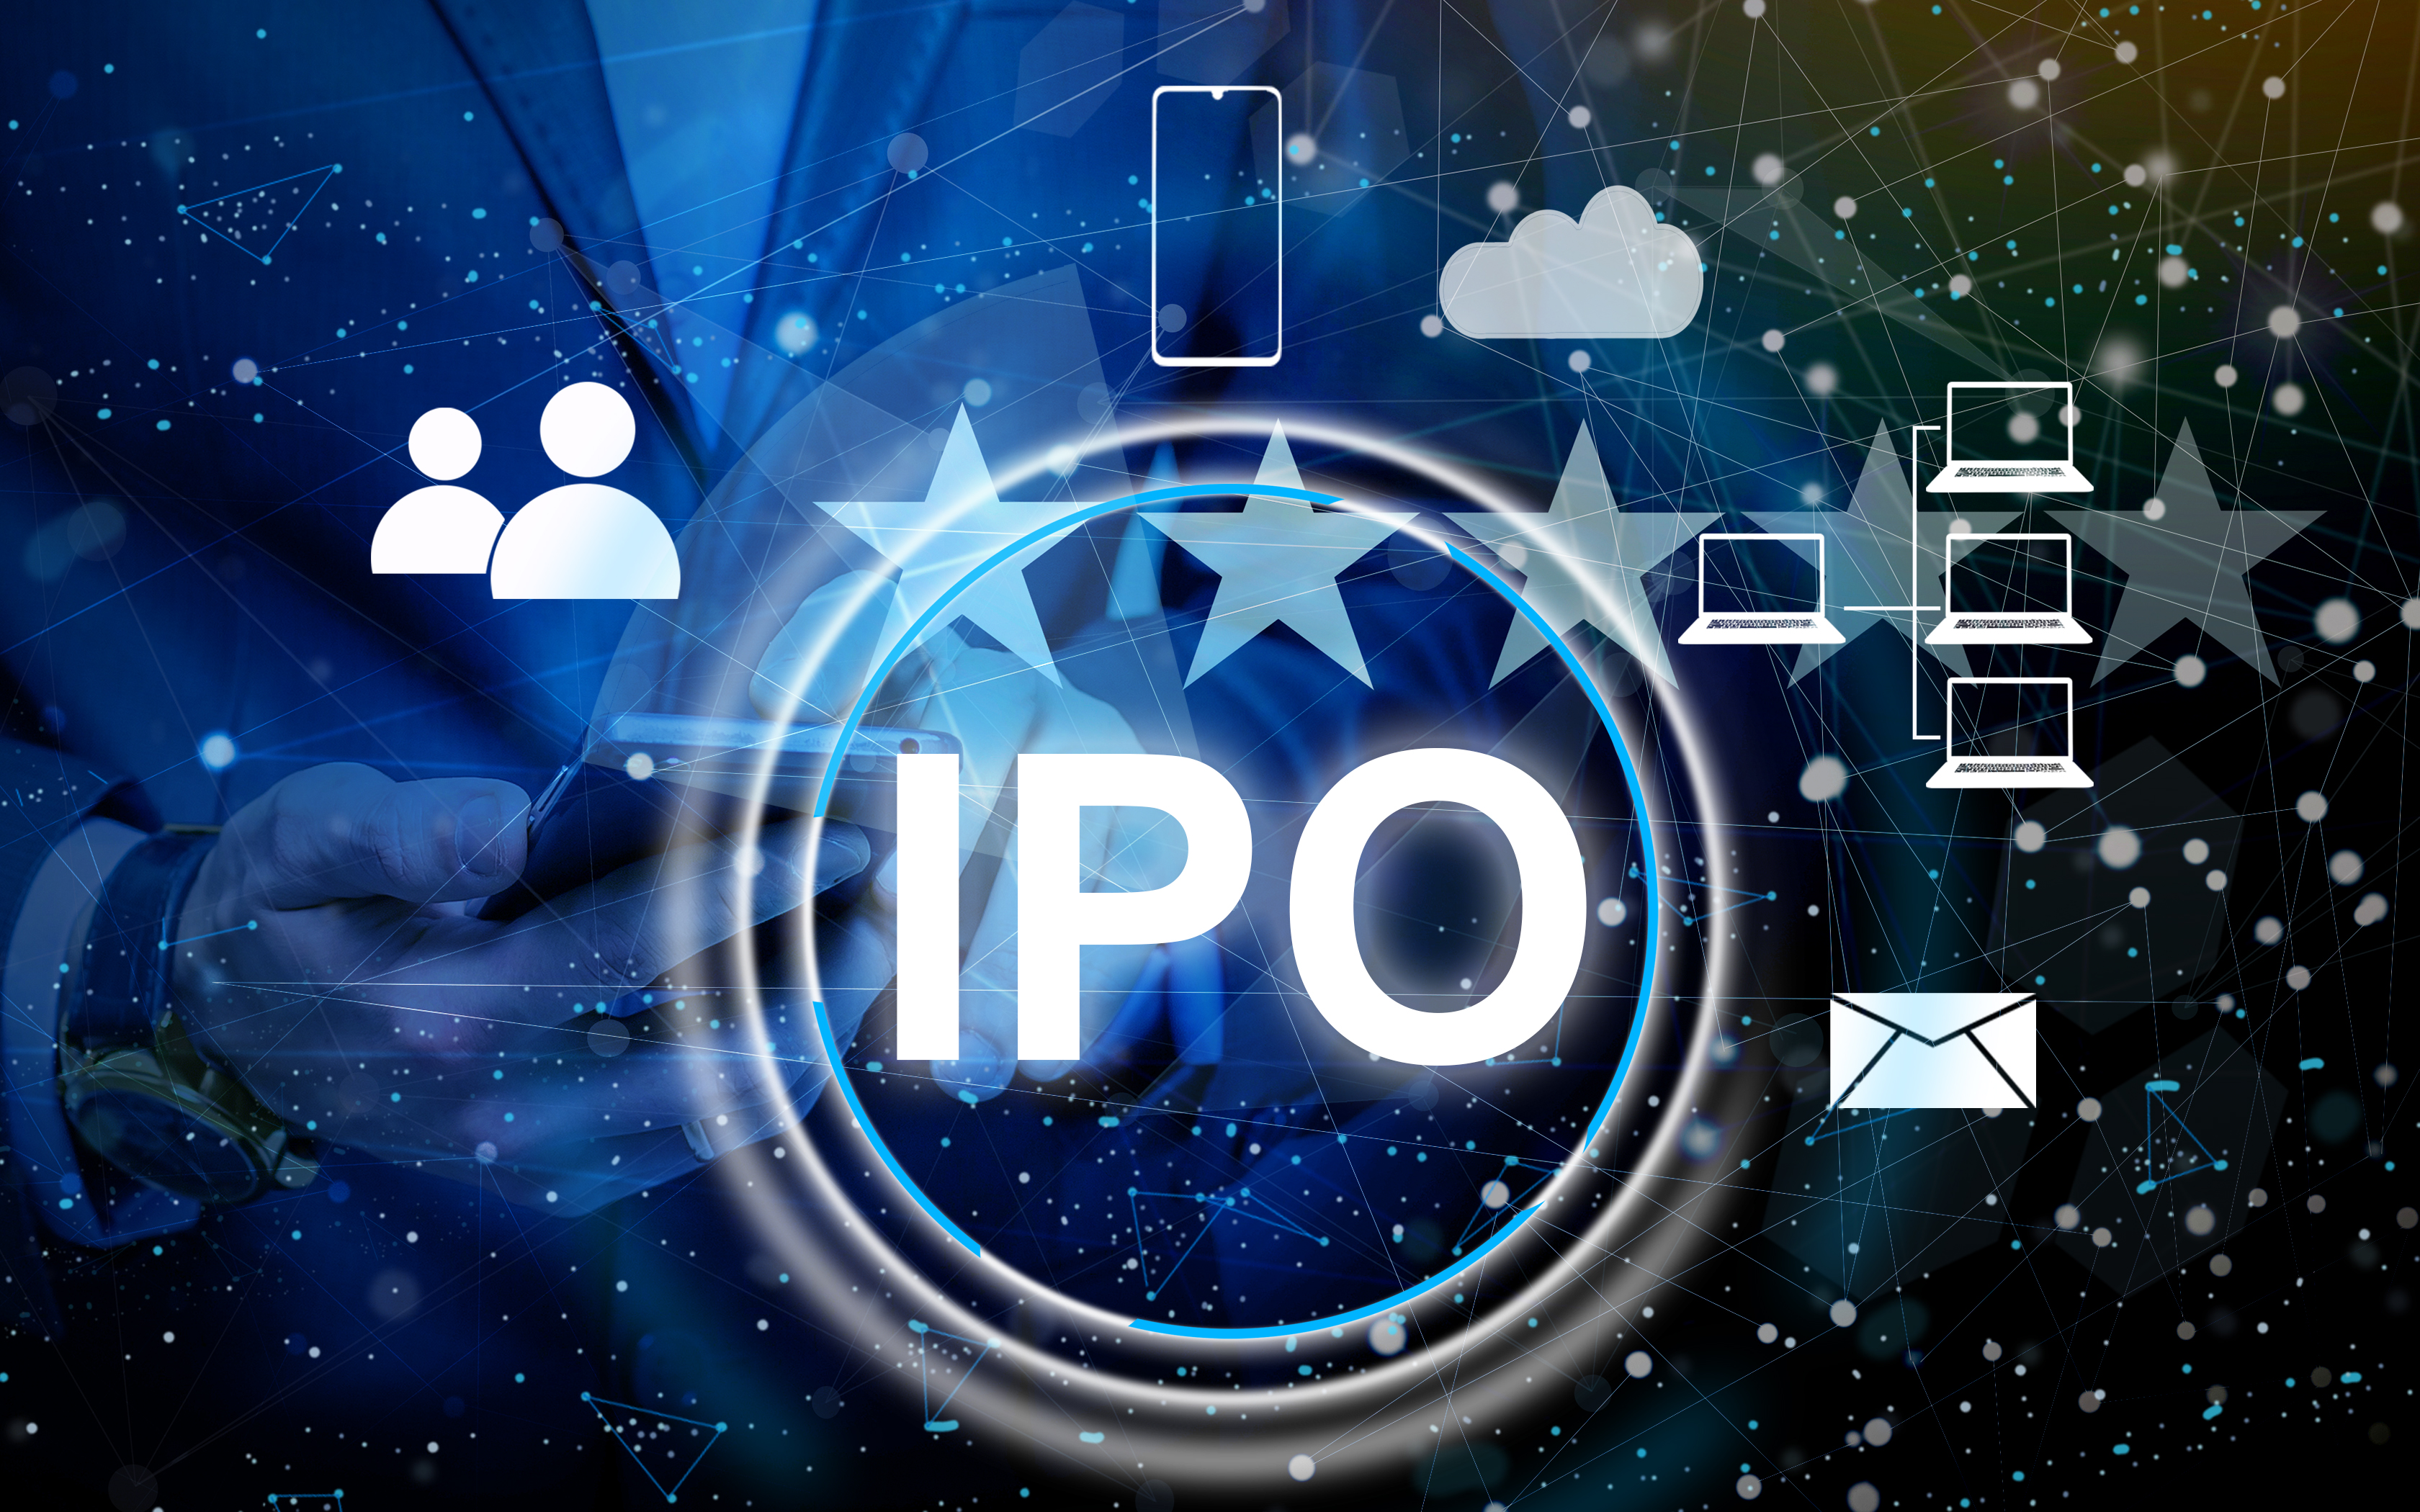 Heating equipment maker JNK India's IPO to open on Apr 23